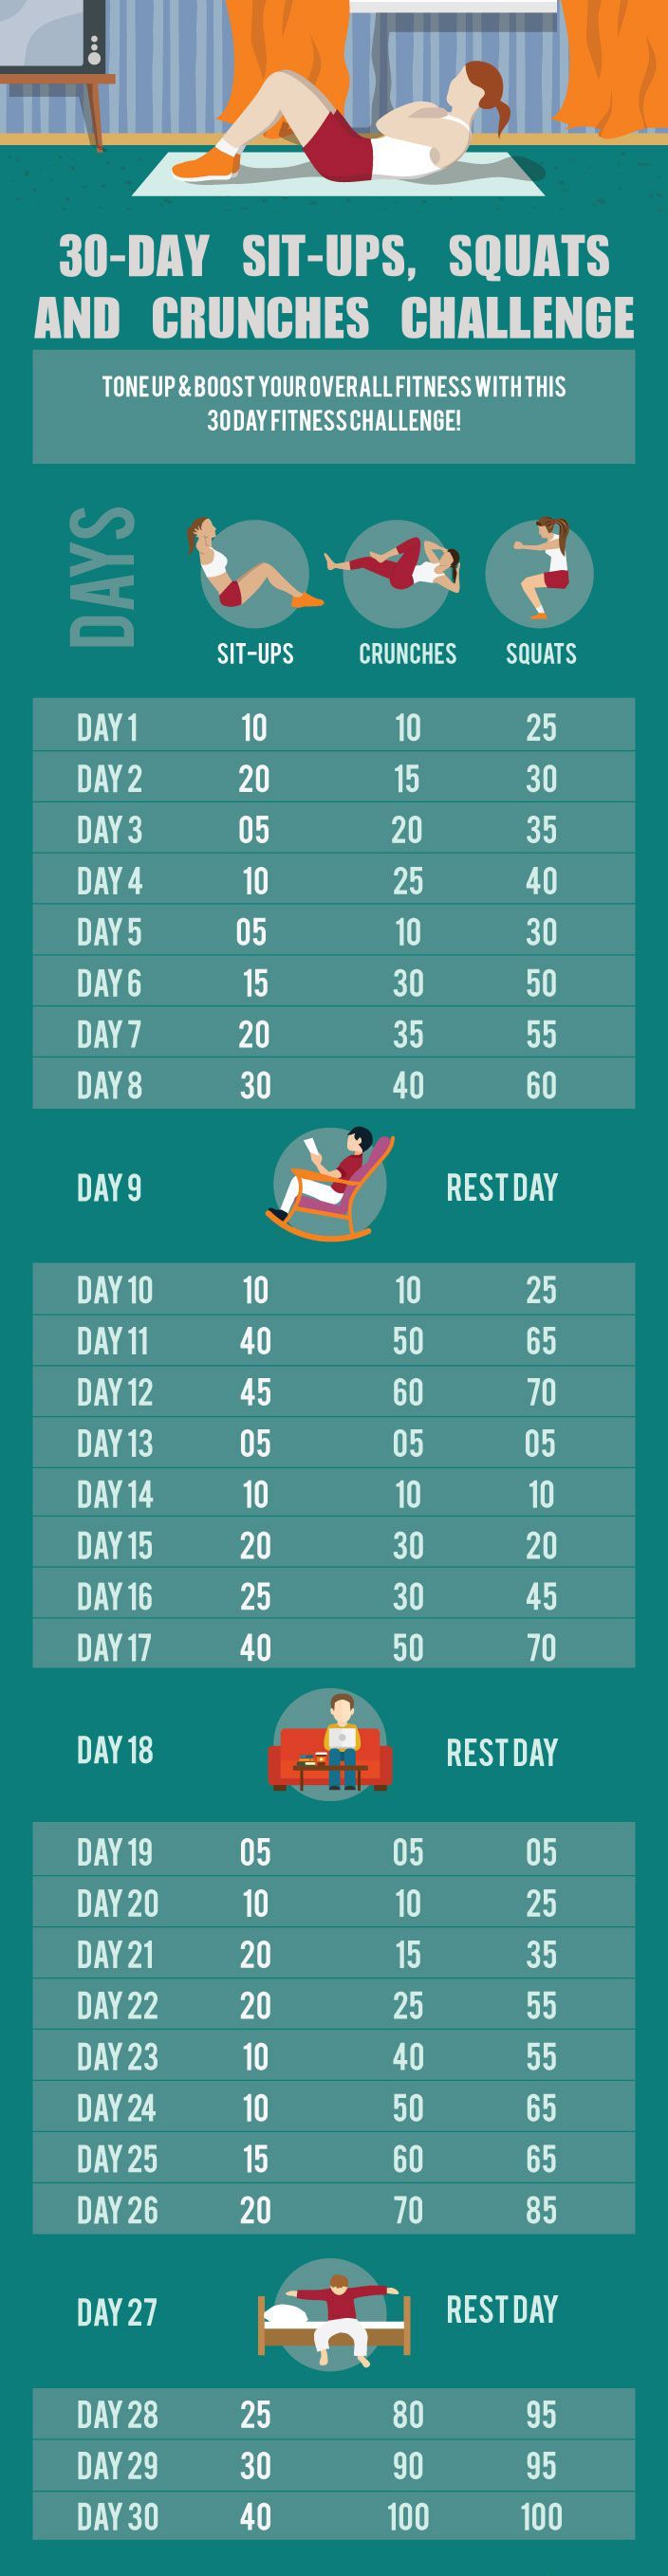 30-day-sit-ups-squats-and-crunches-challenge-fitneass